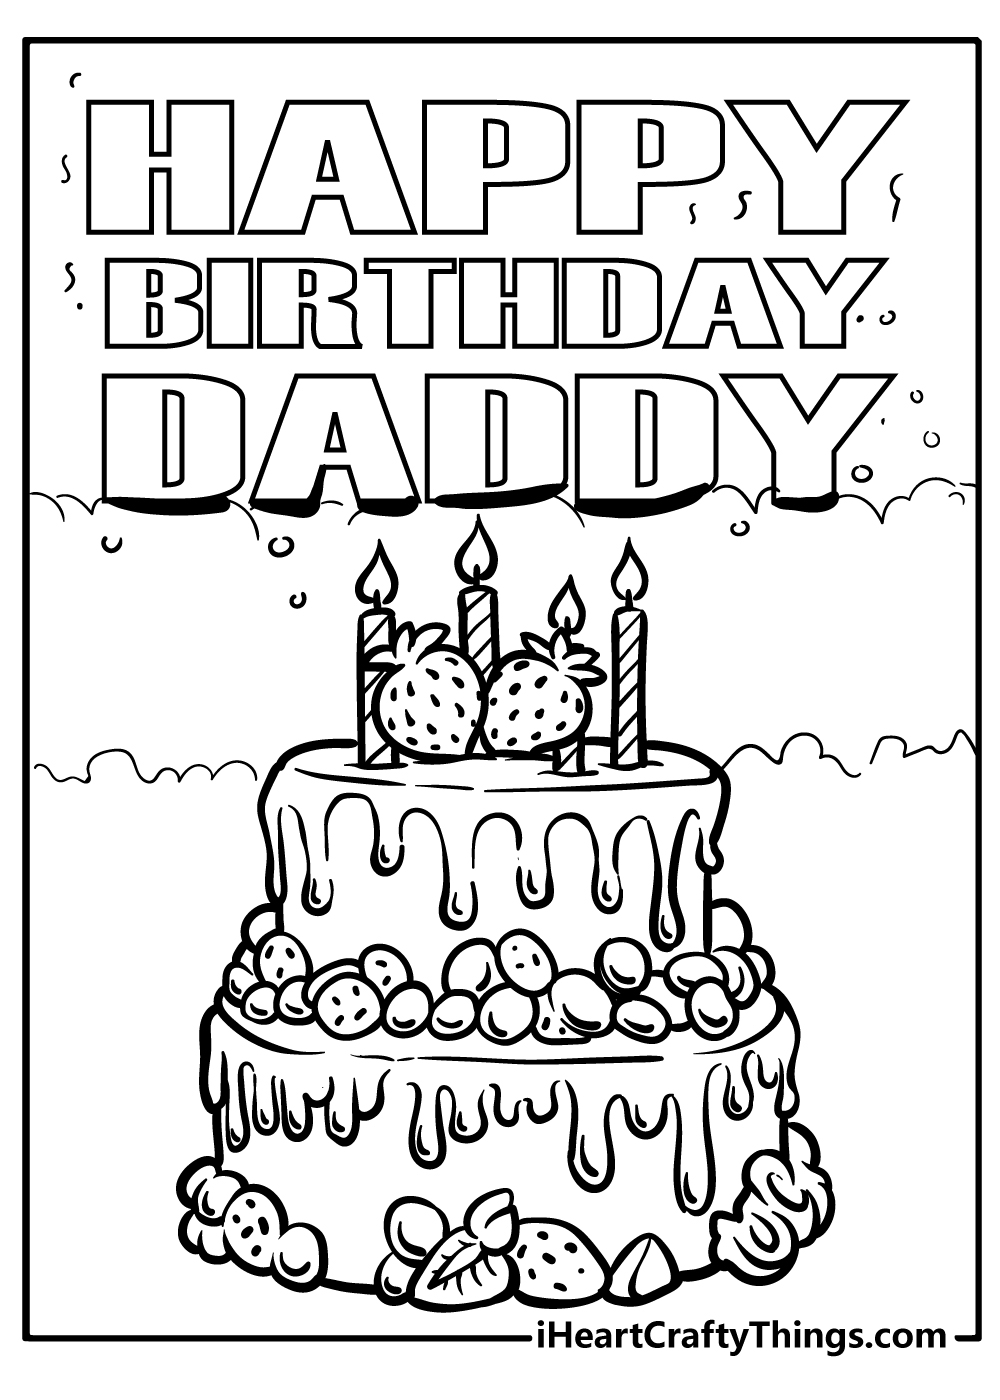 Happy Birthday Coloring Pages for dad free printable